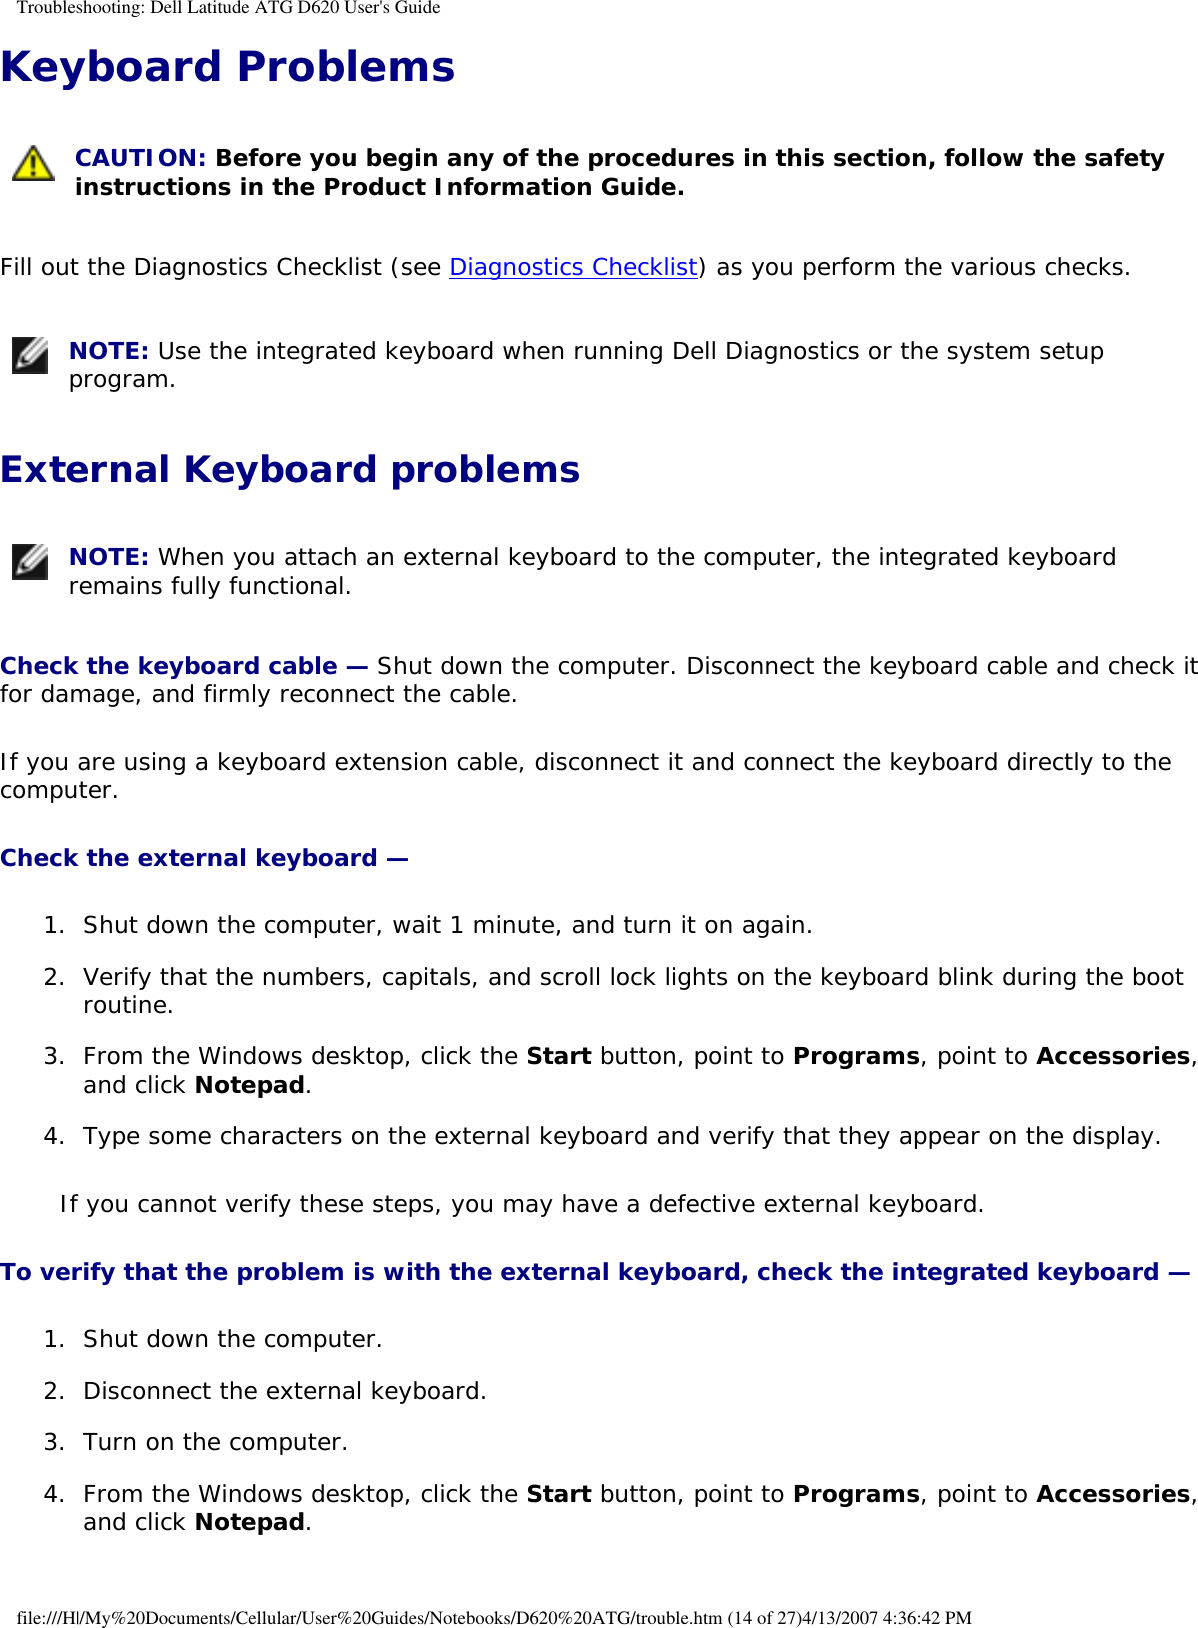 Troubleshooting: Dell Latitude ATG D620 User&apos;s GuideKeyboard Problems  CAUTION: Before you begin any of the procedures in this section, follow the safety instructions in the Product Information Guide. Fill out the Diagnostics Checklist (see Diagnostics Checklist) as you perform the various checks. NOTE: Use the integrated keyboard when running Dell Diagnostics or the system setup program. External Keyboard problems NOTE: When you attach an external keyboard to the computer, the integrated keyboard remains fully functional. Check the keyboard cable — Shut down the computer. Disconnect the keyboard cable and check it for damage, and firmly reconnect the cable.If you are using a keyboard extension cable, disconnect it and connect the keyboard directly to the computer.Check the external keyboard — 1.  Shut down the computer, wait 1 minute, and turn it on again.   2.  Verify that the numbers, capitals, and scroll lock lights on the keyboard blink during the boot routine.   3.  From the Windows desktop, click the Start button, point to Programs, point to Accessories, and click Notepad.   4.  Type some characters on the external keyboard and verify that they appear on the display.   If you cannot verify these steps, you may have a defective external keyboard. To verify that the problem is with the external keyboard, check the integrated keyboard — 1.  Shut down the computer.   2.  Disconnect the external keyboard.   3.  Turn on the computer.   4.  From the Windows desktop, click the Start button, point to Programs, point to Accessories, and click Notepad.   file:///H|/My%20Documents/Cellular/User%20Guides/Notebooks/D620%20ATG/trouble.htm (14 of 27)4/13/2007 4:36:42 PM